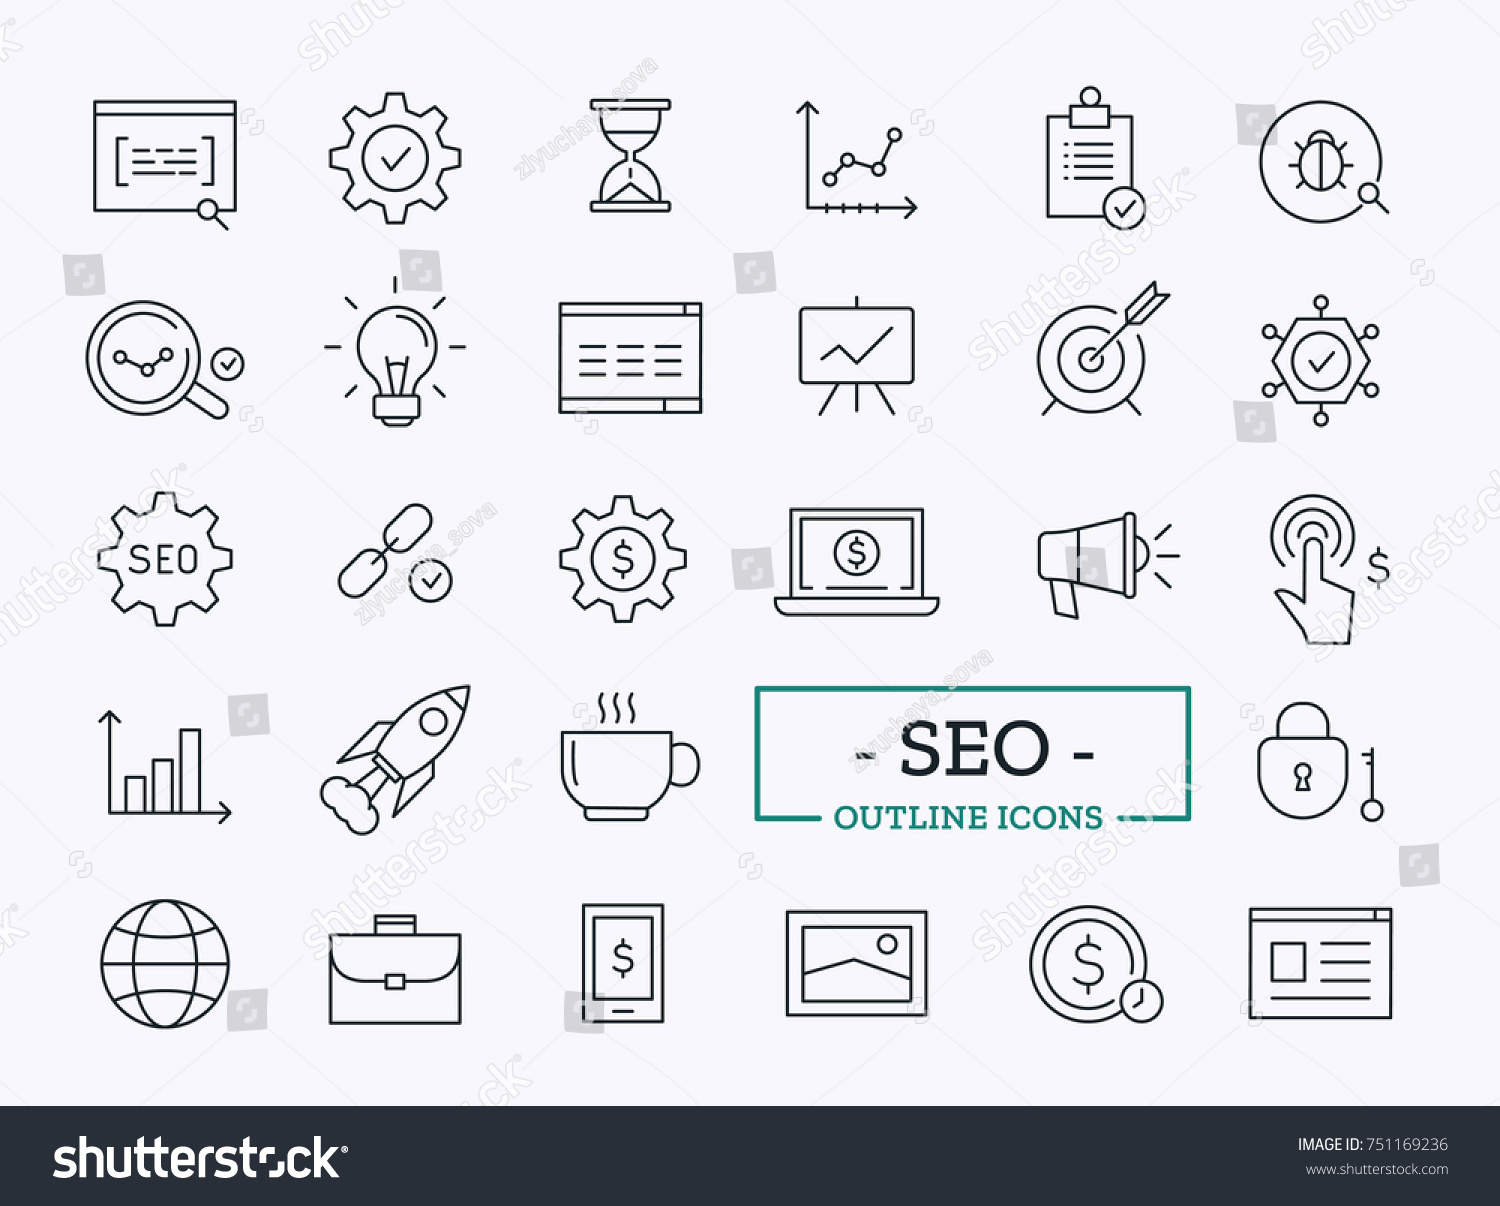 Search Engine Optimization Vector Outline Icons. SEO Elements. #751169236